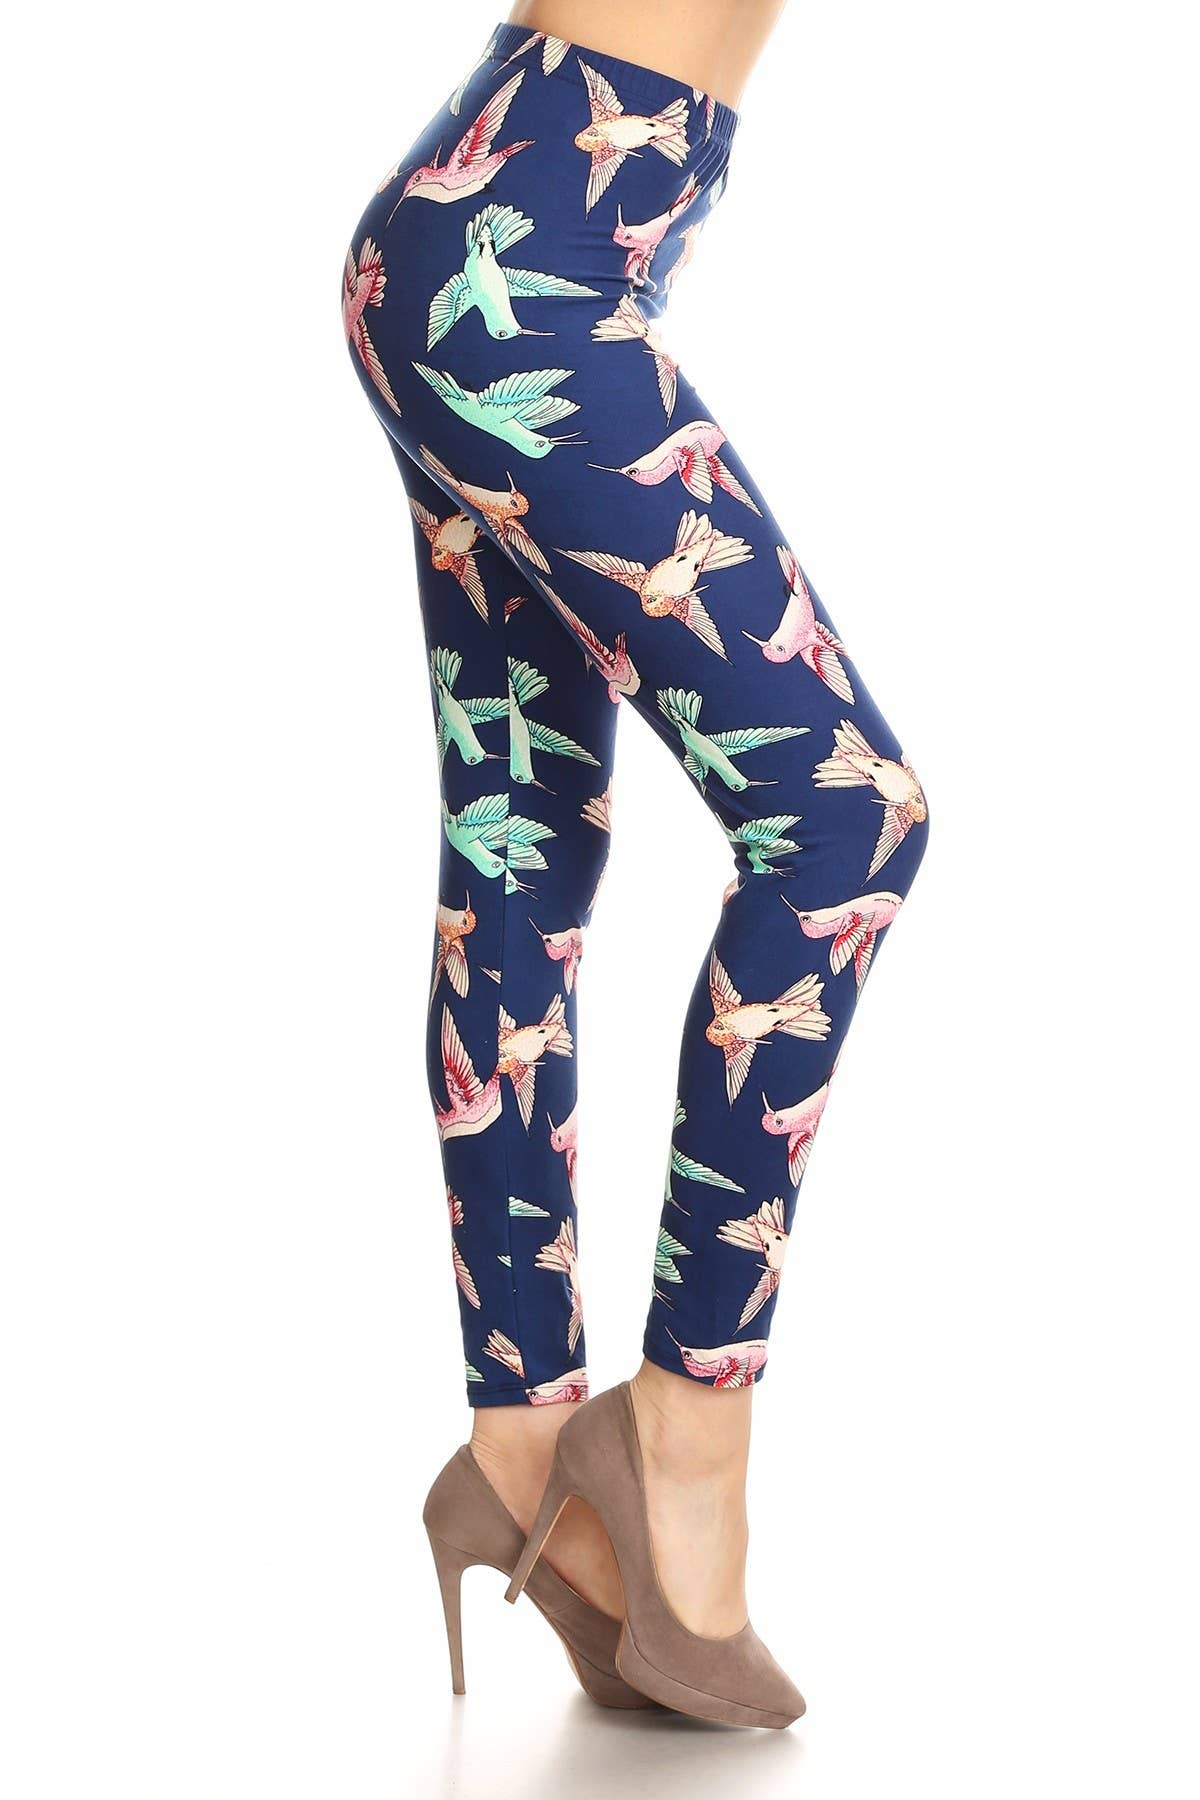 High waisted hummingbirds printed legging: One Size